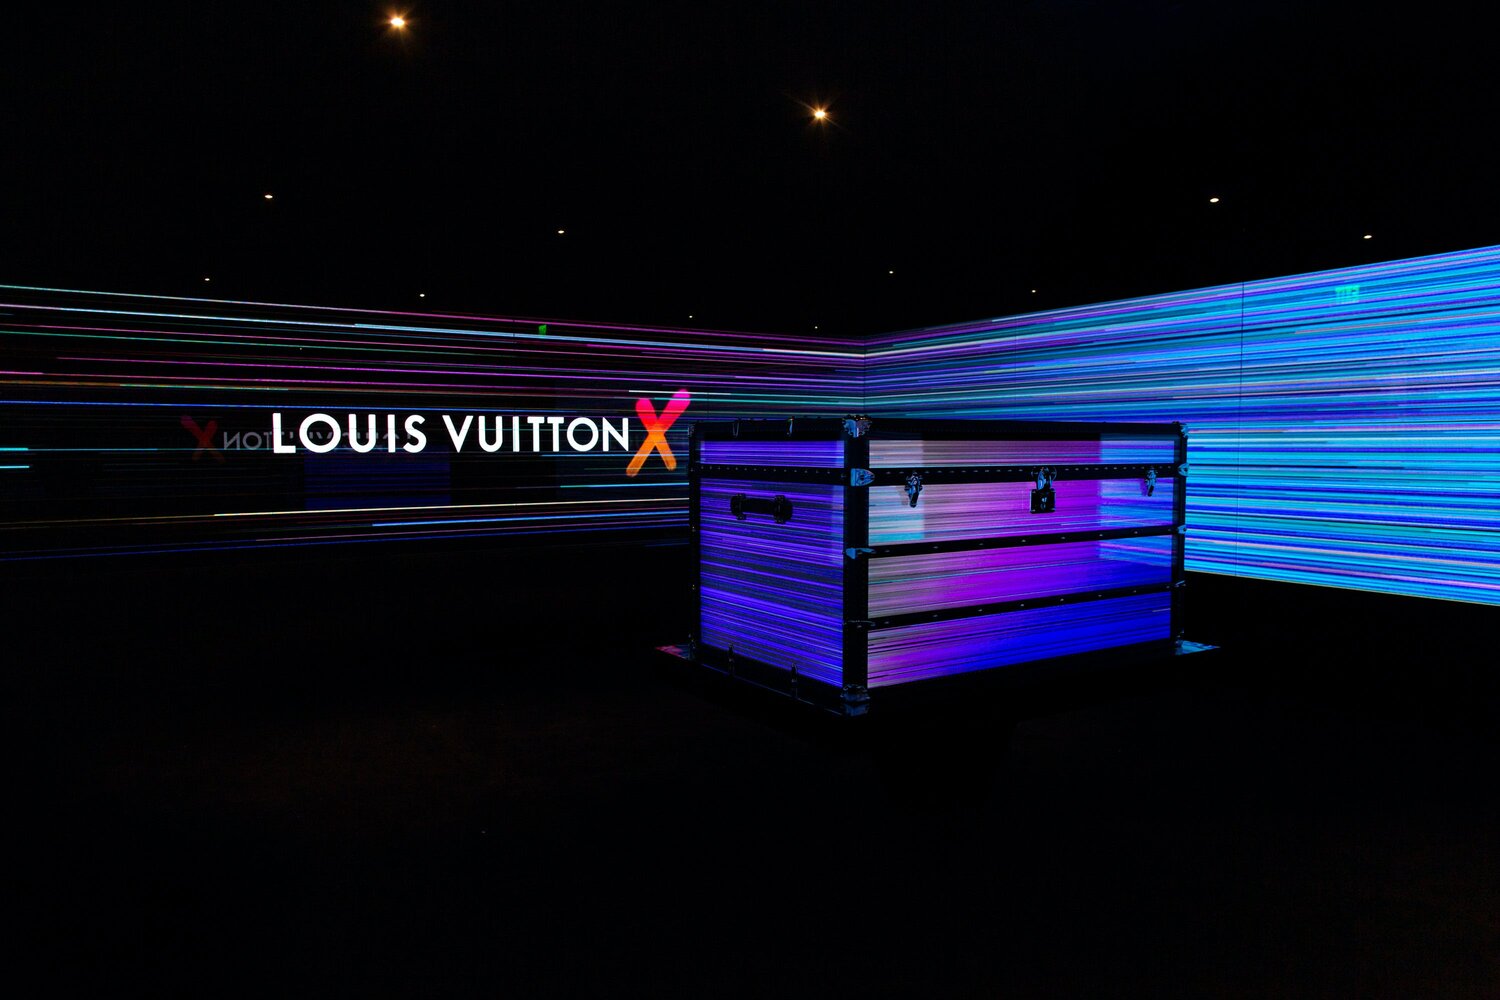 Louis Vuitton: Open Today: the Time capsule exhibition in Los Angeles